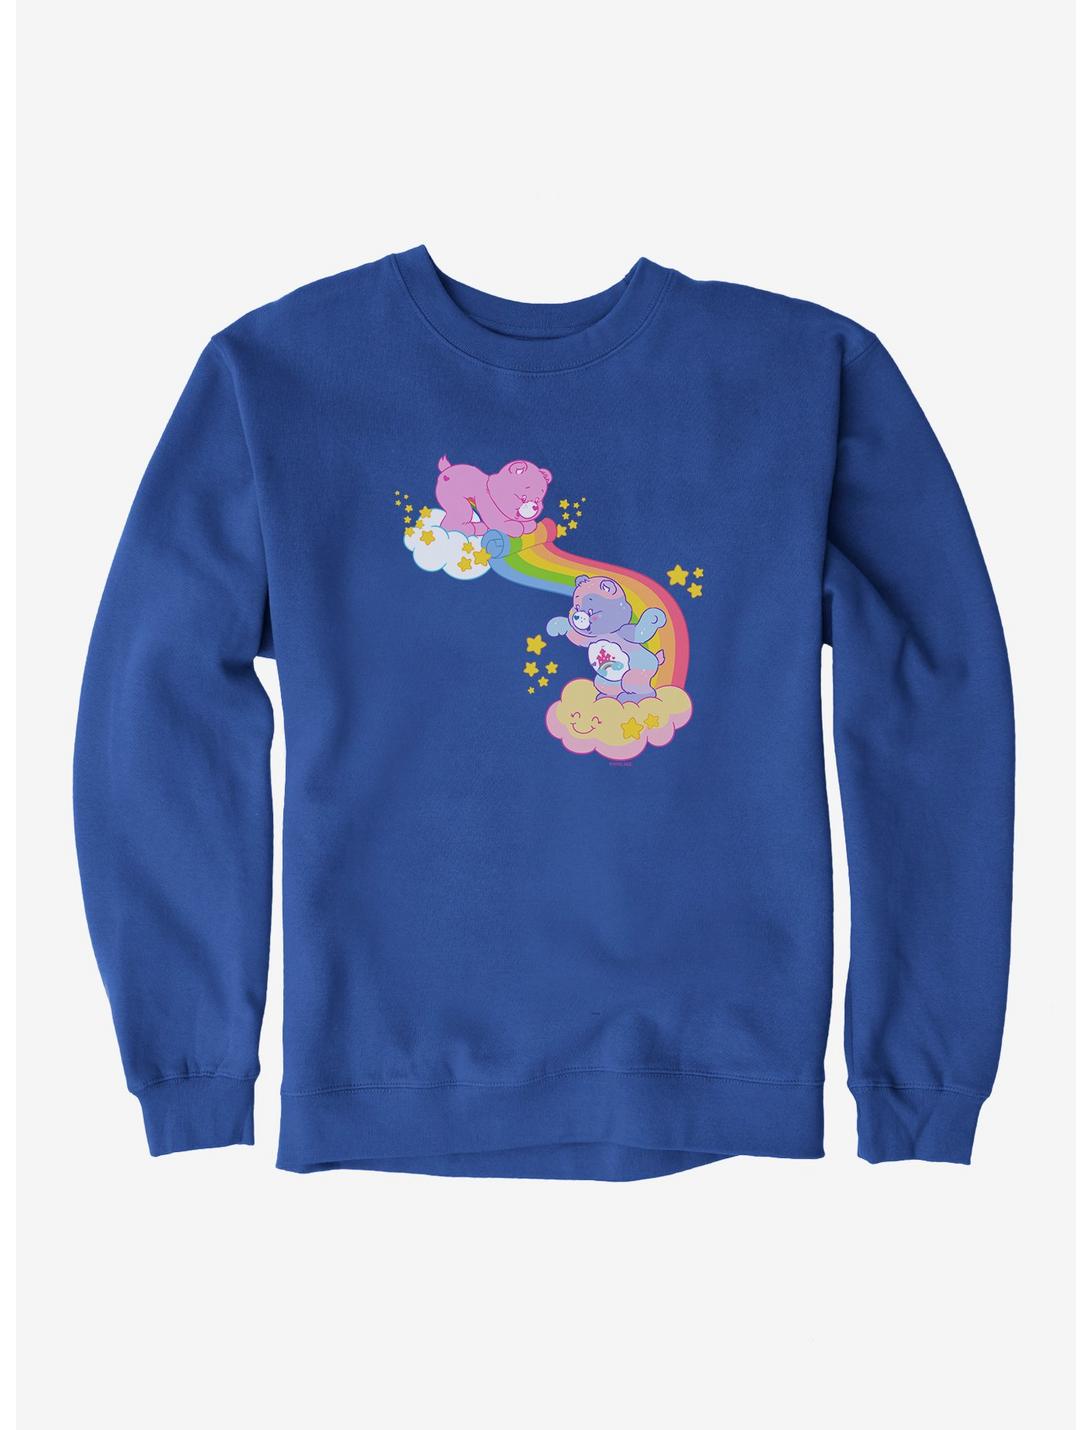 Care Bears In The Clouds Sweatshirt, ROYAL BLUE, hi-res